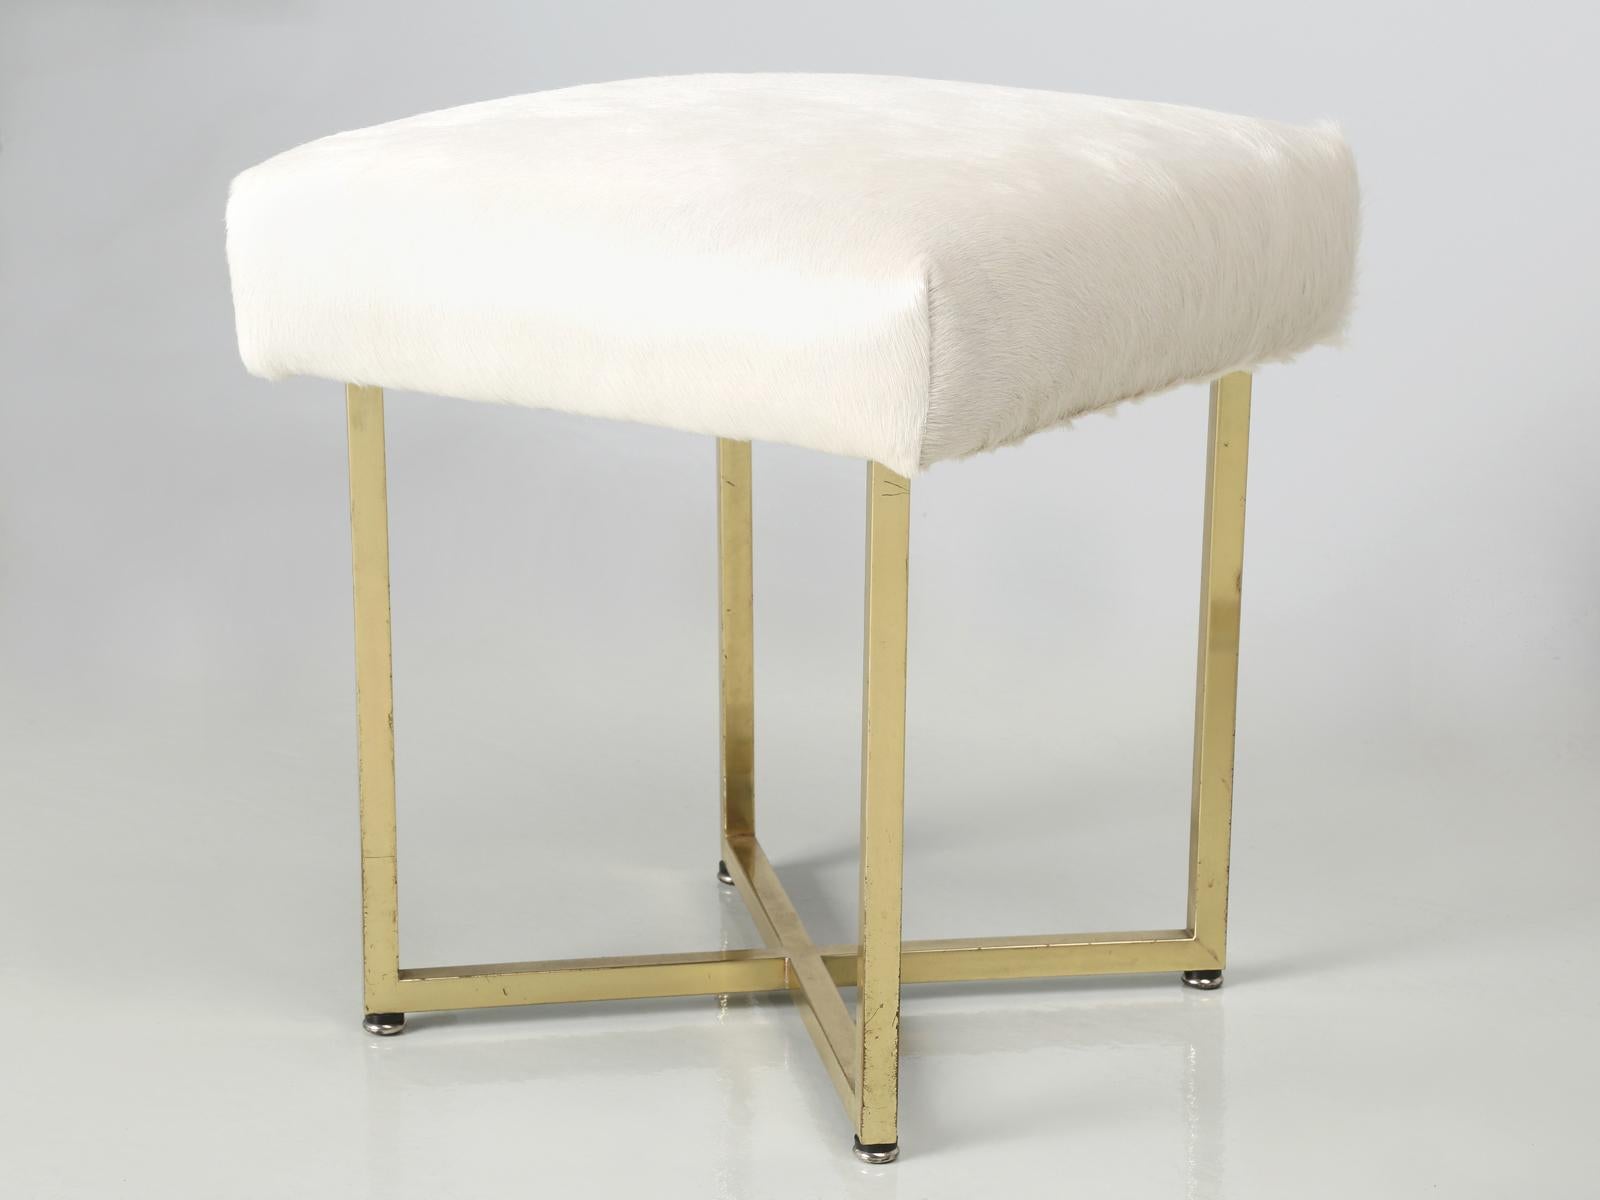 Machine-Made Pair of Vintage Brass Stools Attributed to Paul McCobb with Hair on Hide For Sale